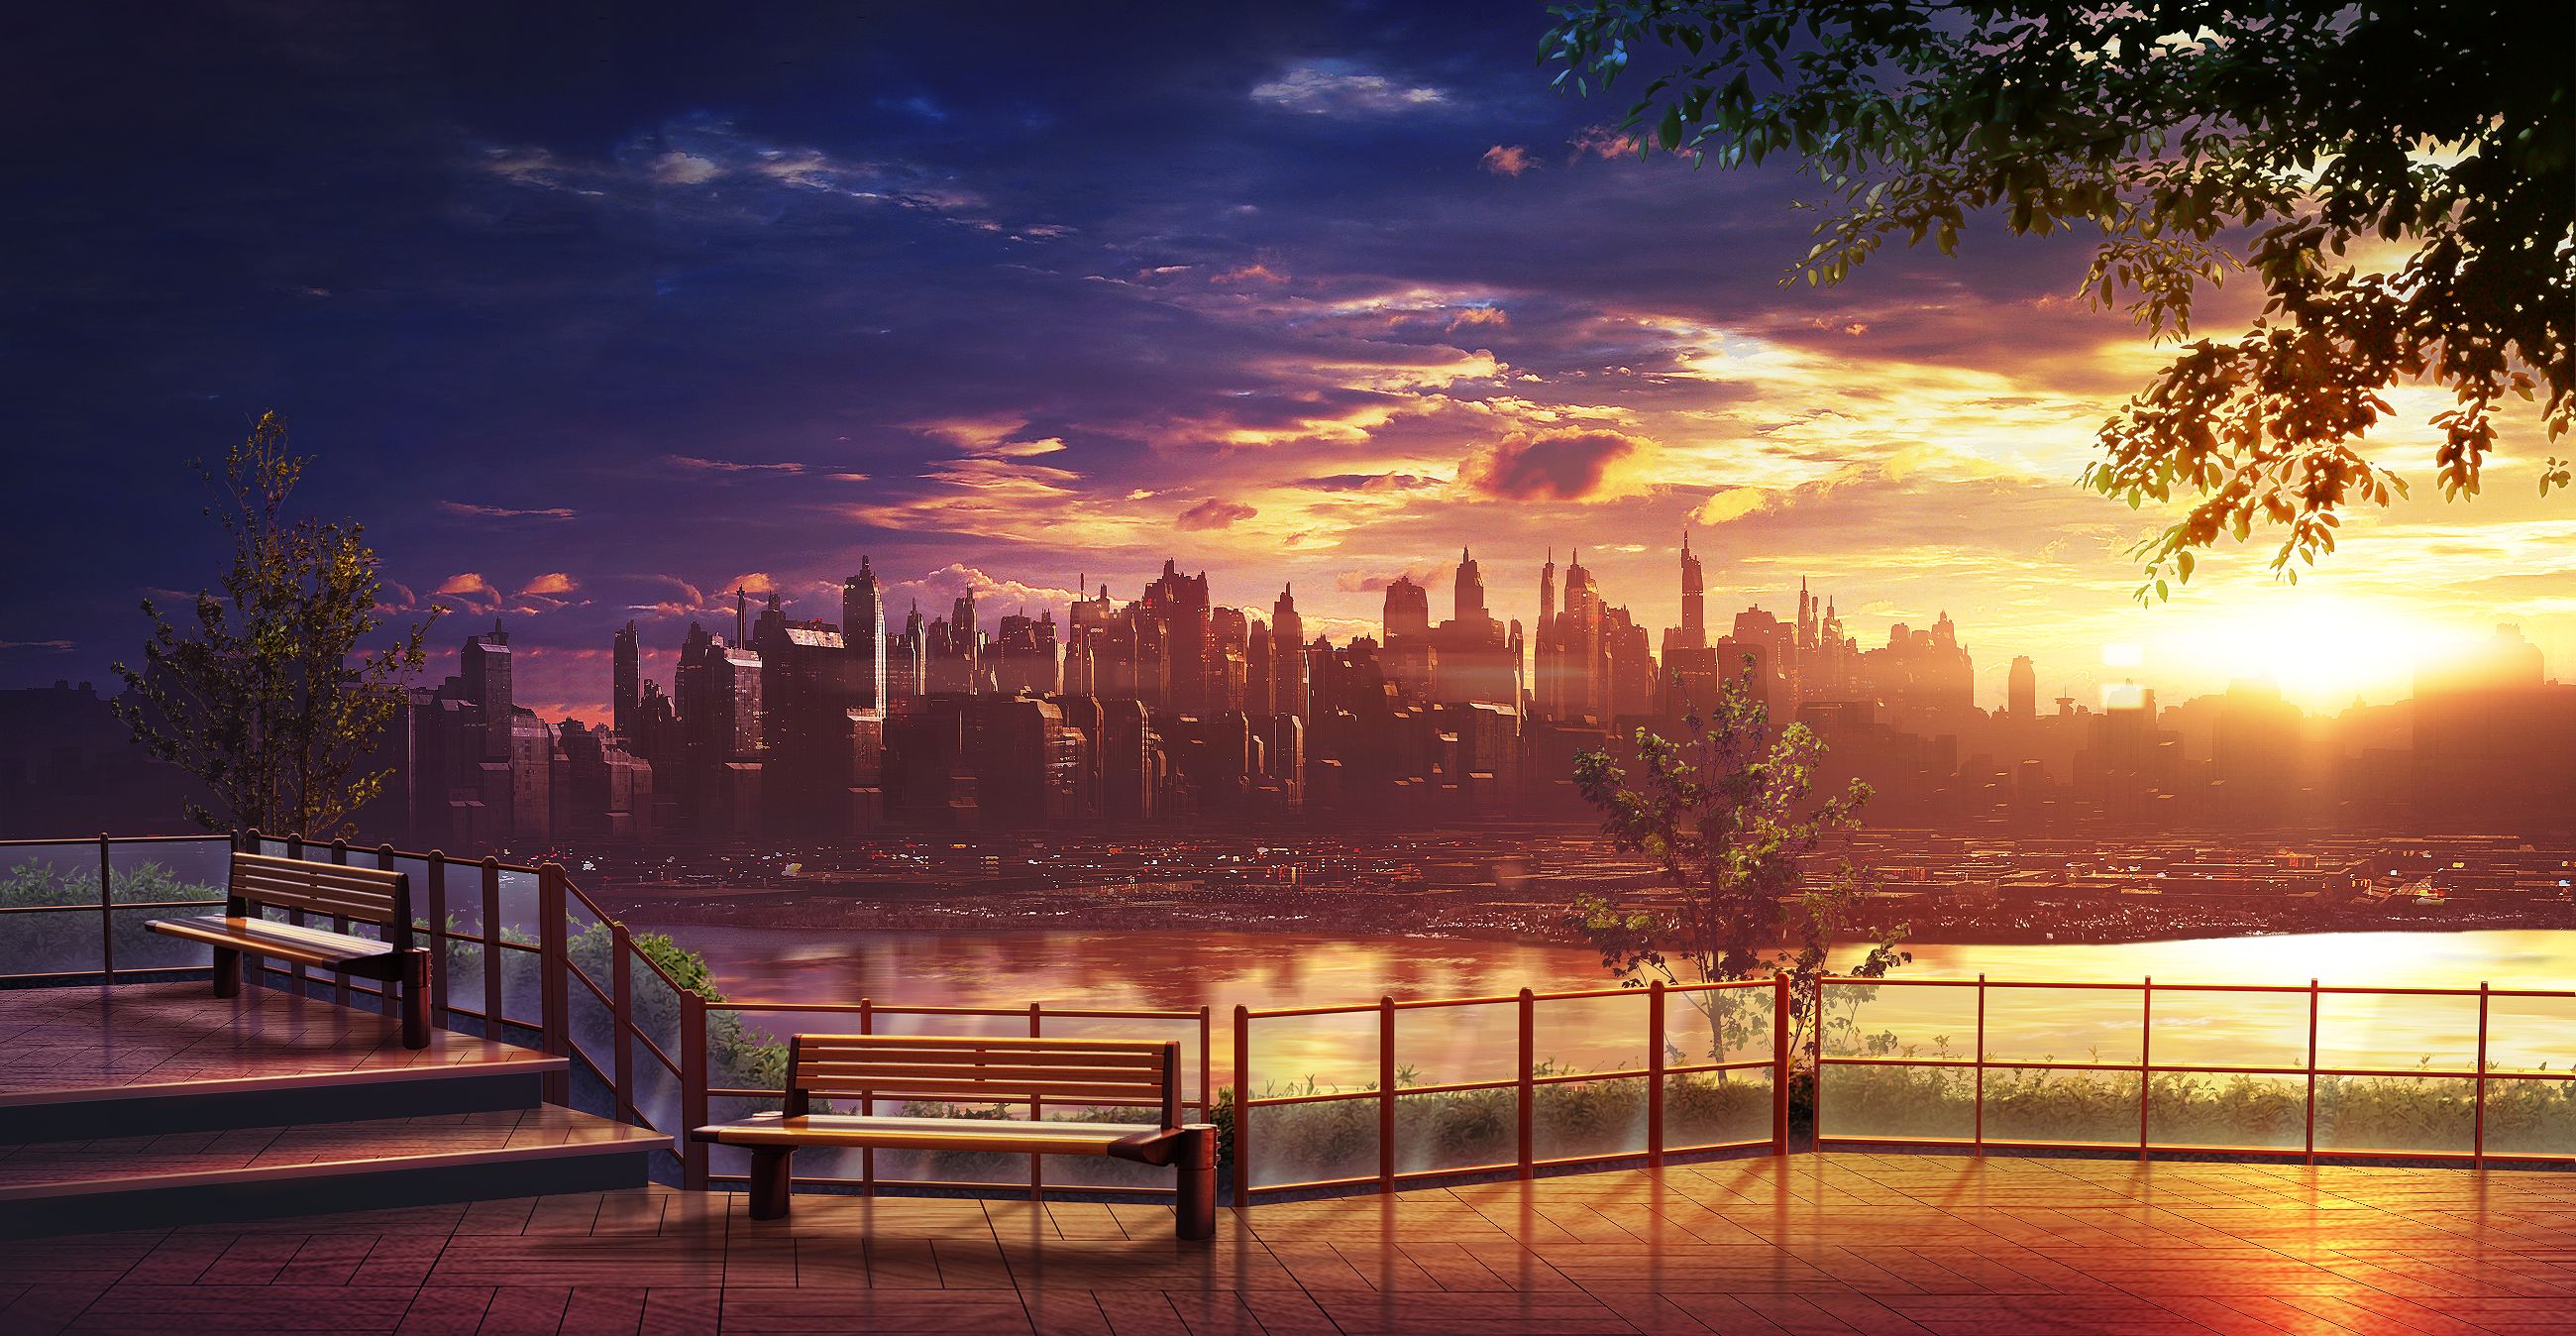 sky, parc, stairs, city, evening, cloud, bench, sunset, lake, anime